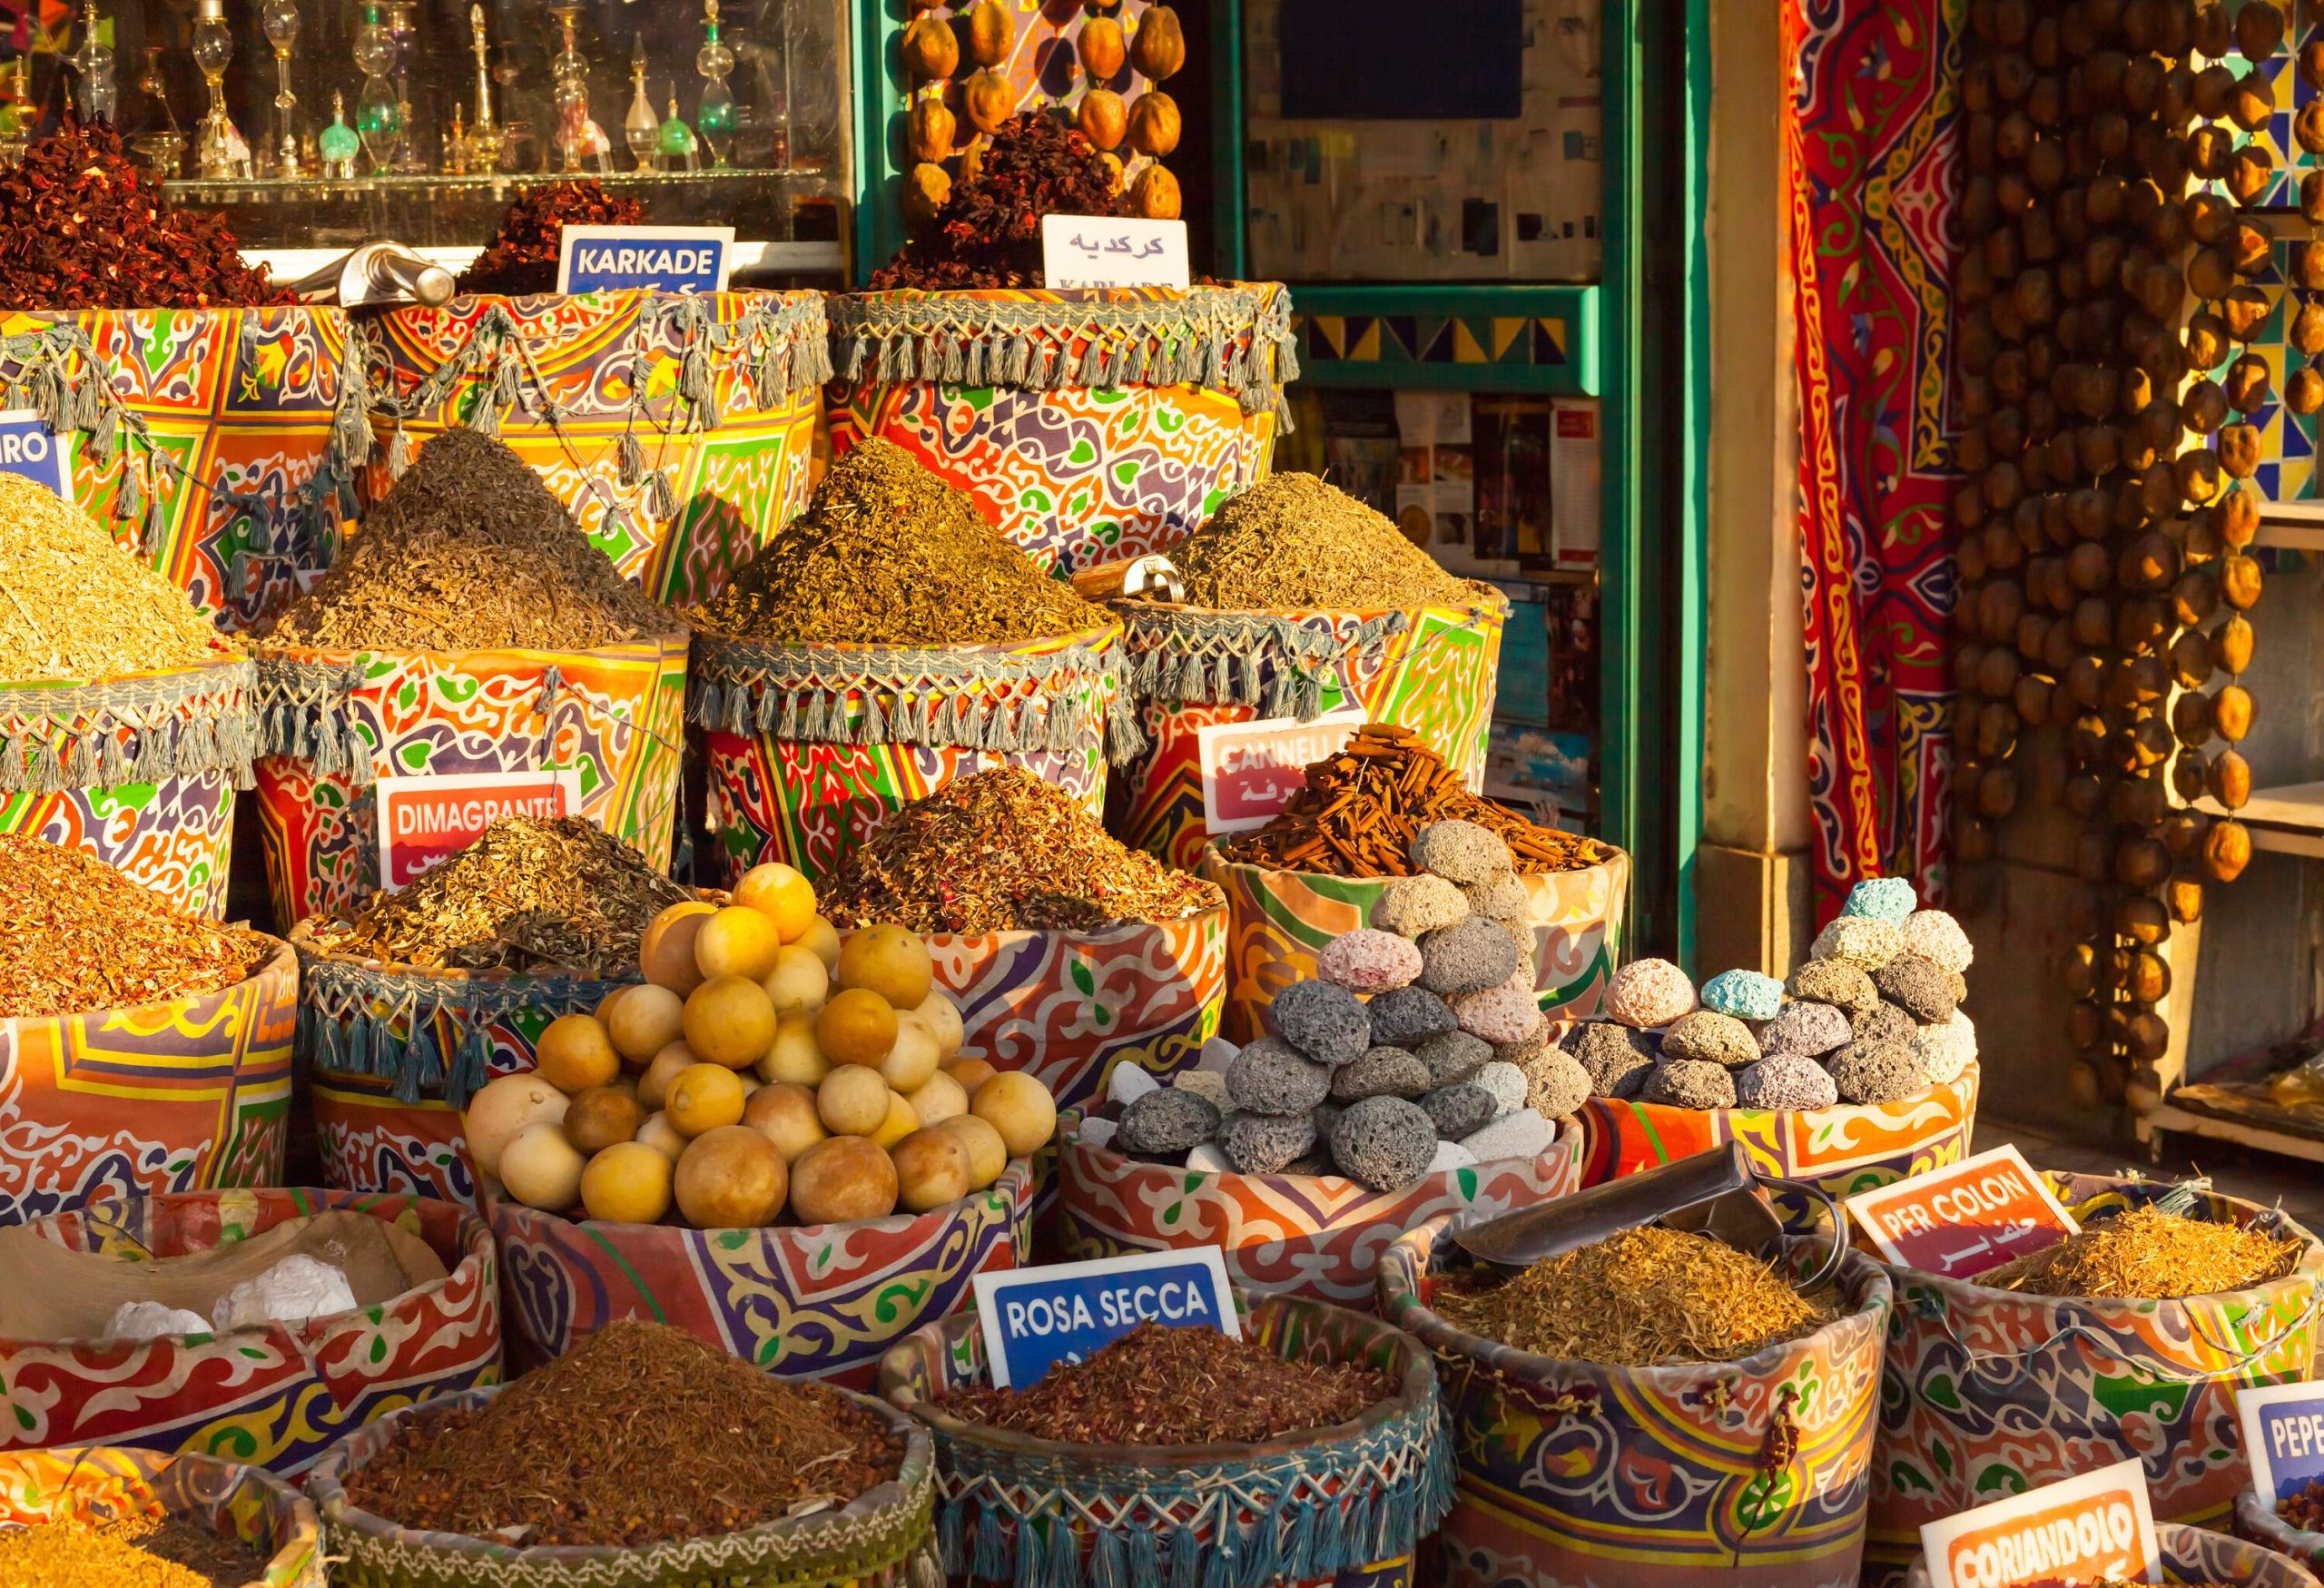 Herbs and spices displayed in a shop in the street market.